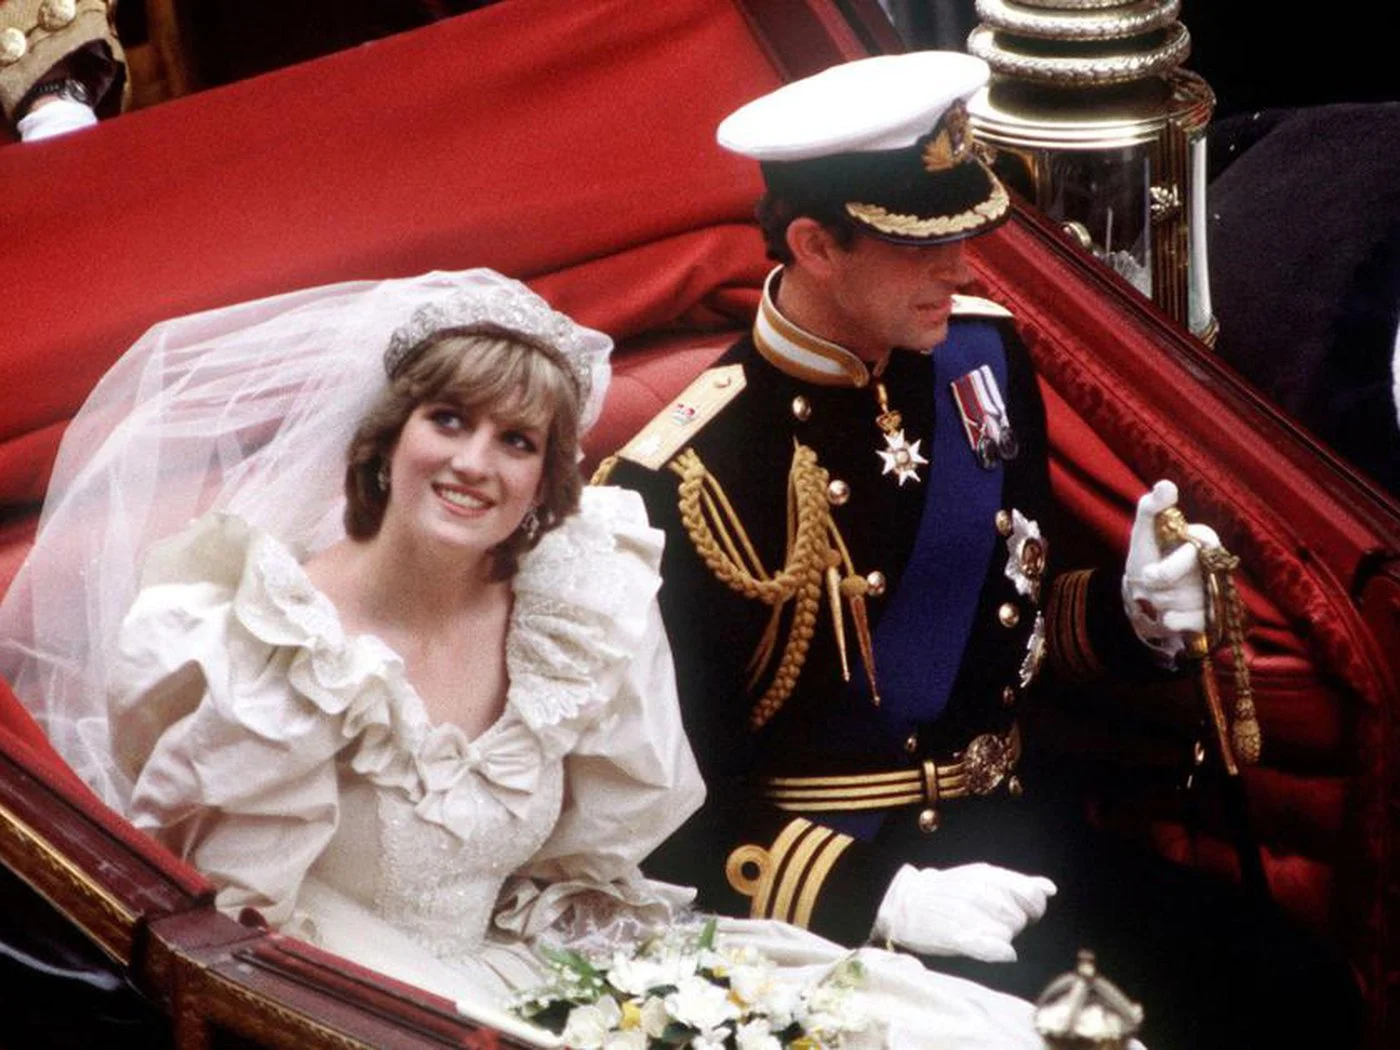 Remembering Diana Spencer: the people’s princess – The Hi-Times